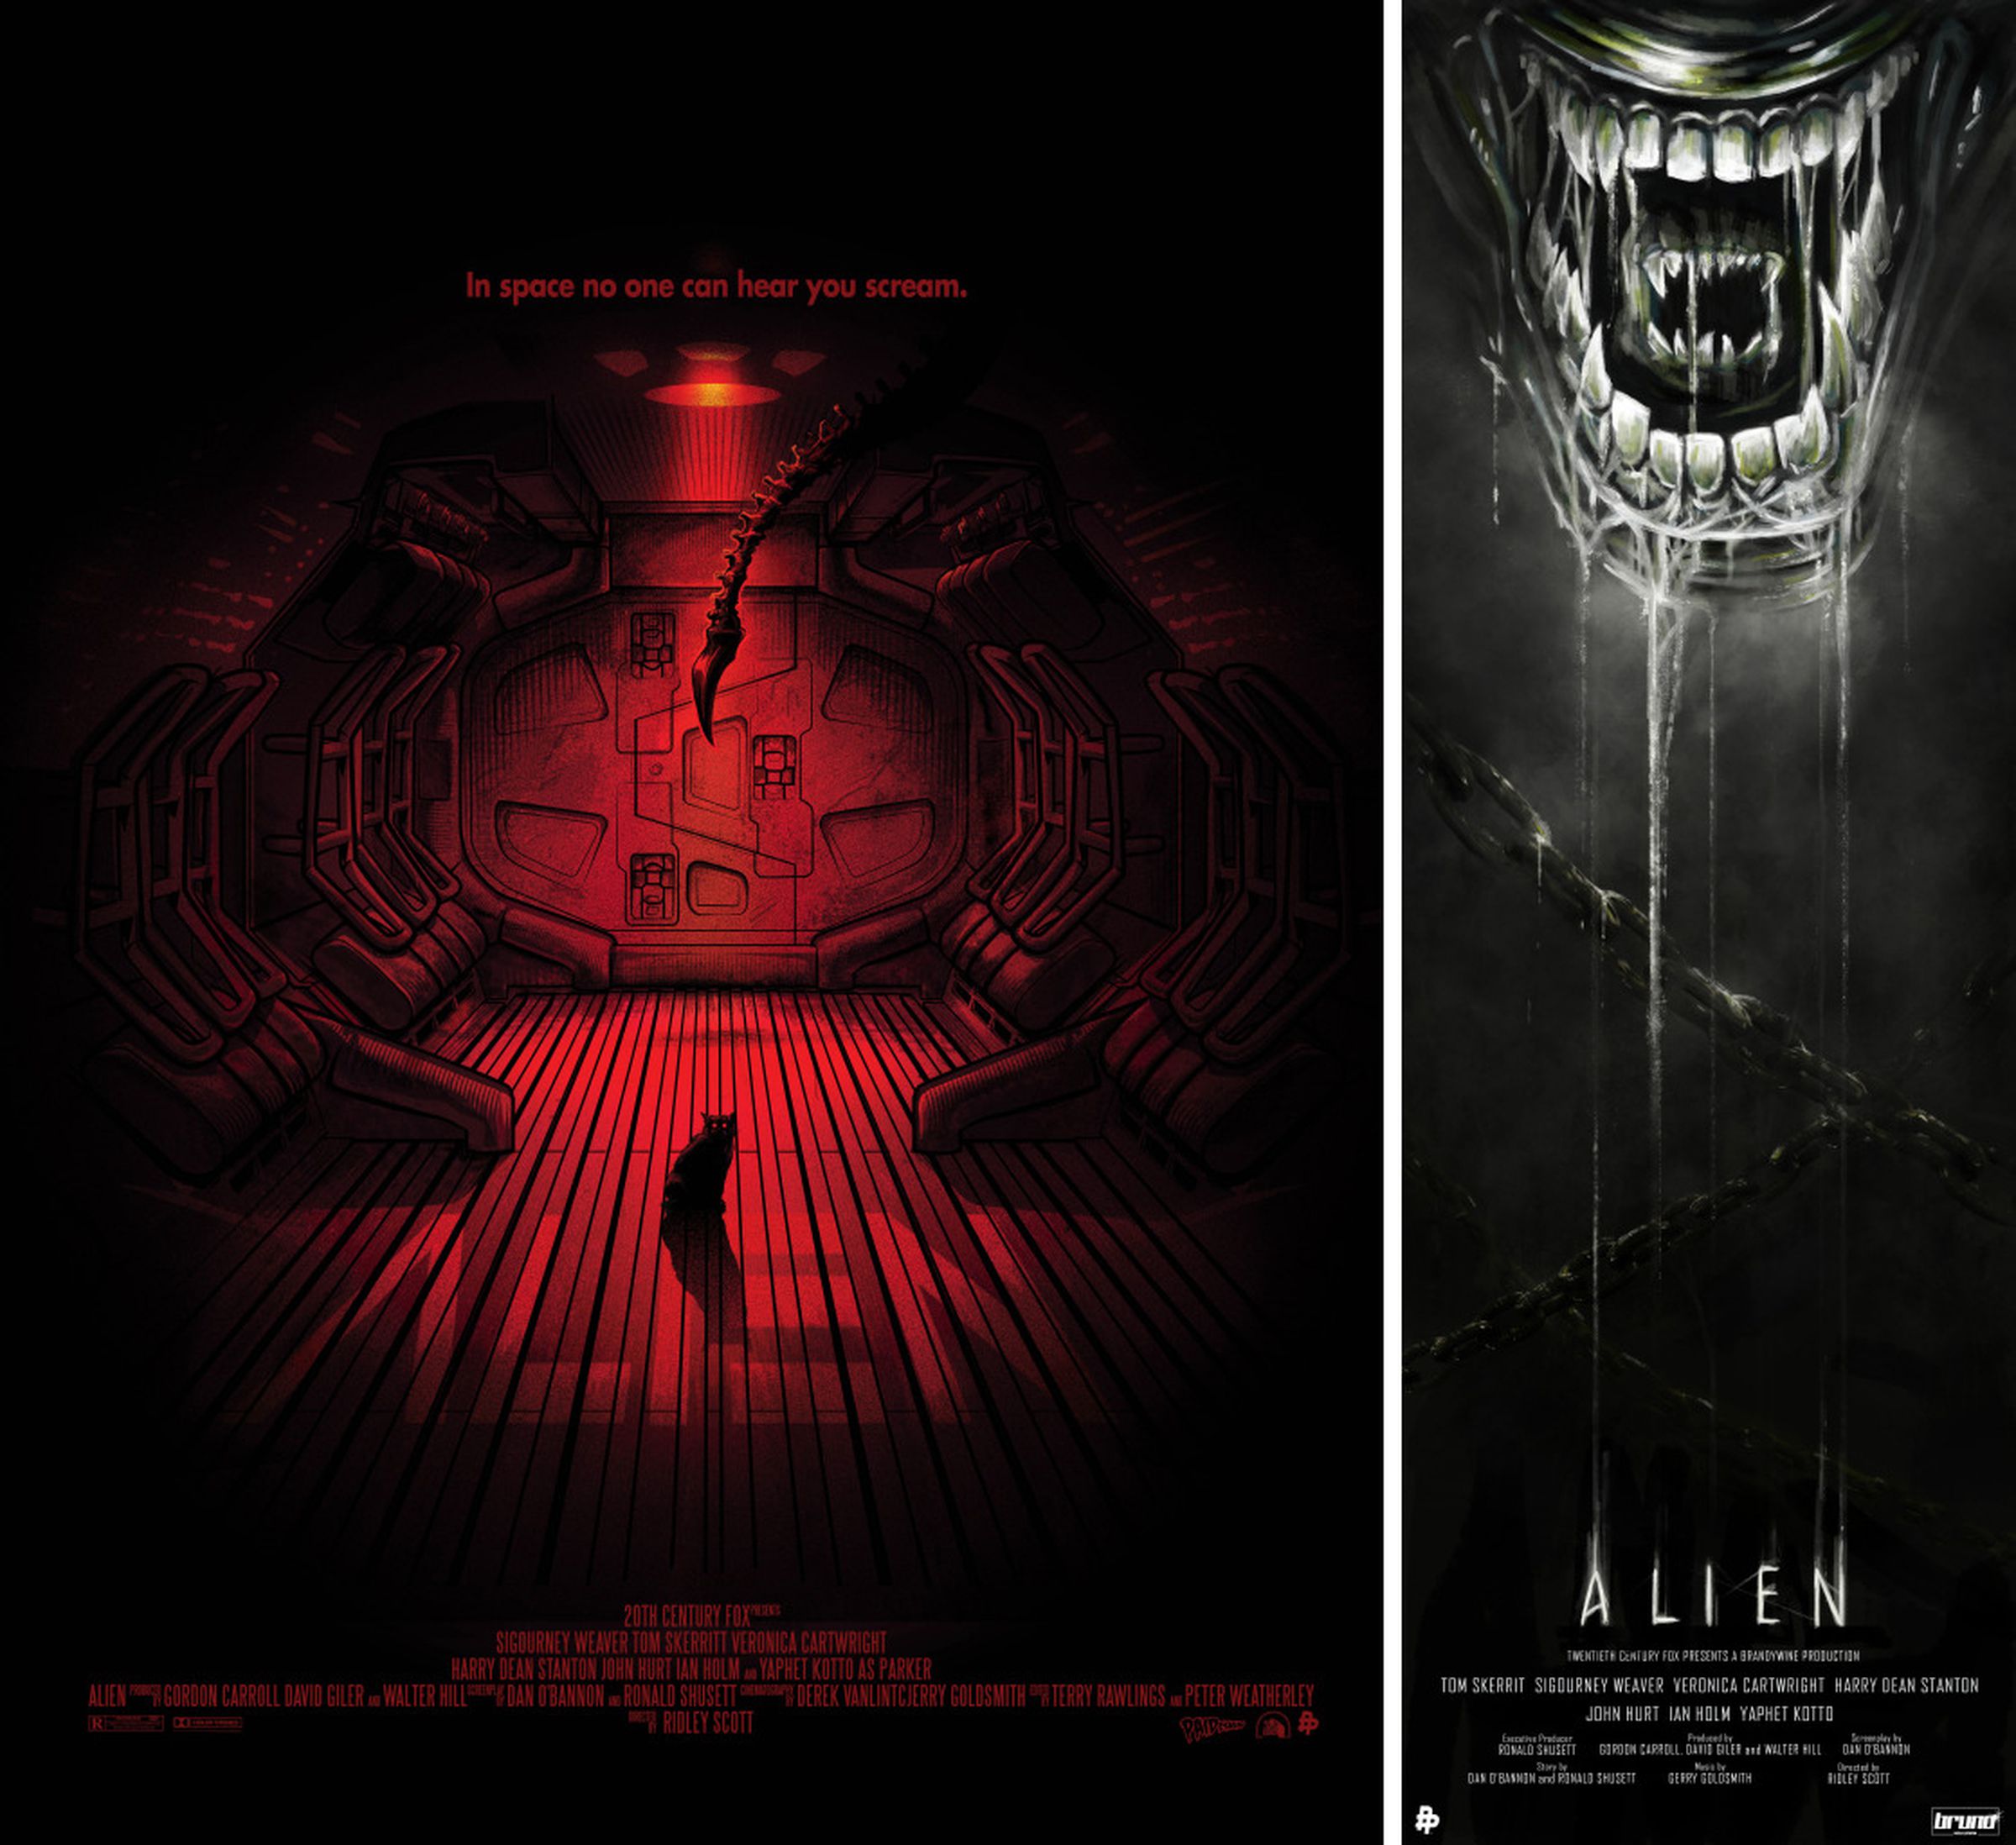 35th anniversary Alien posters